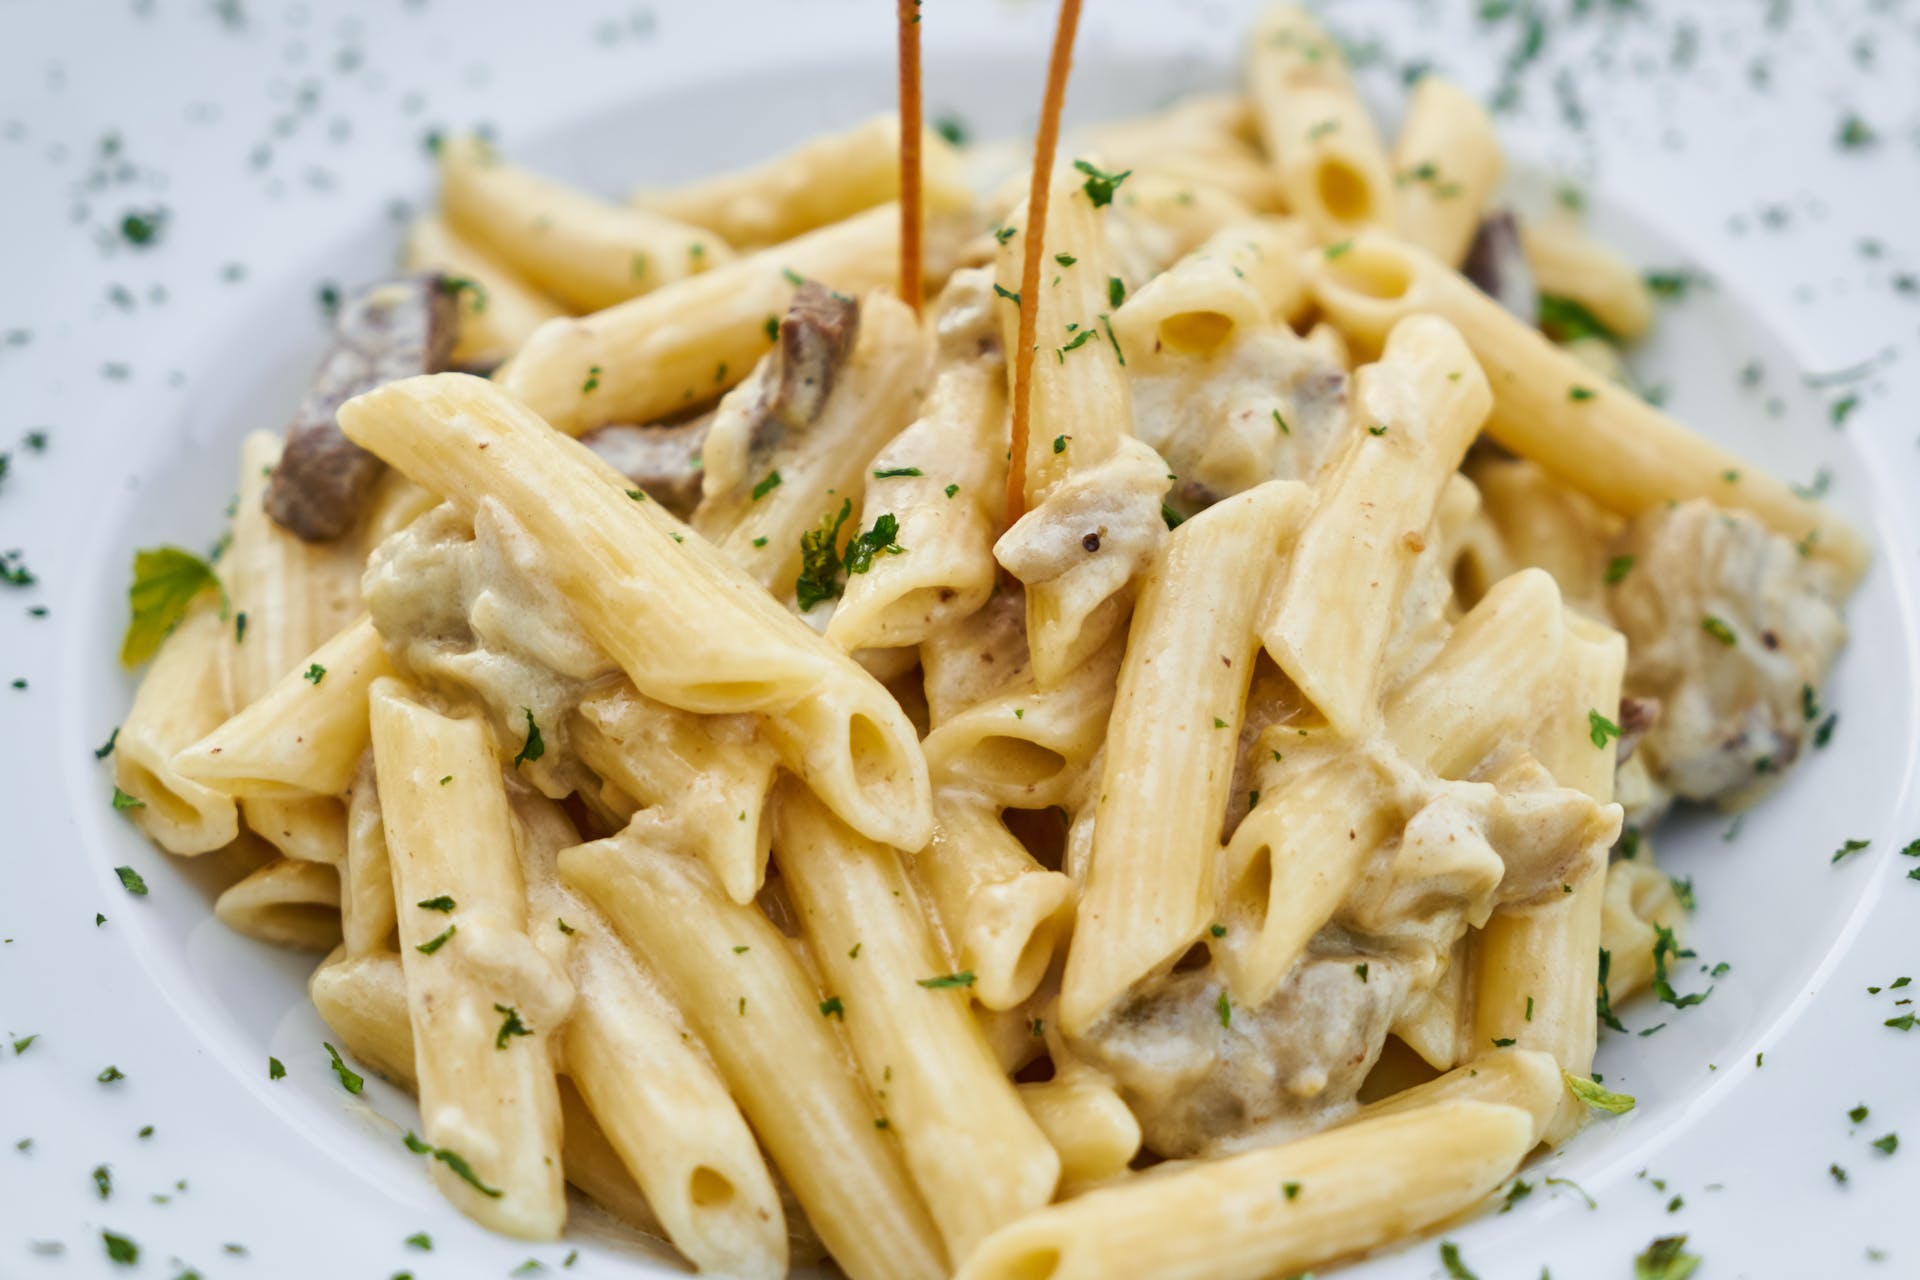 A plate of pasta | Source: Pexels